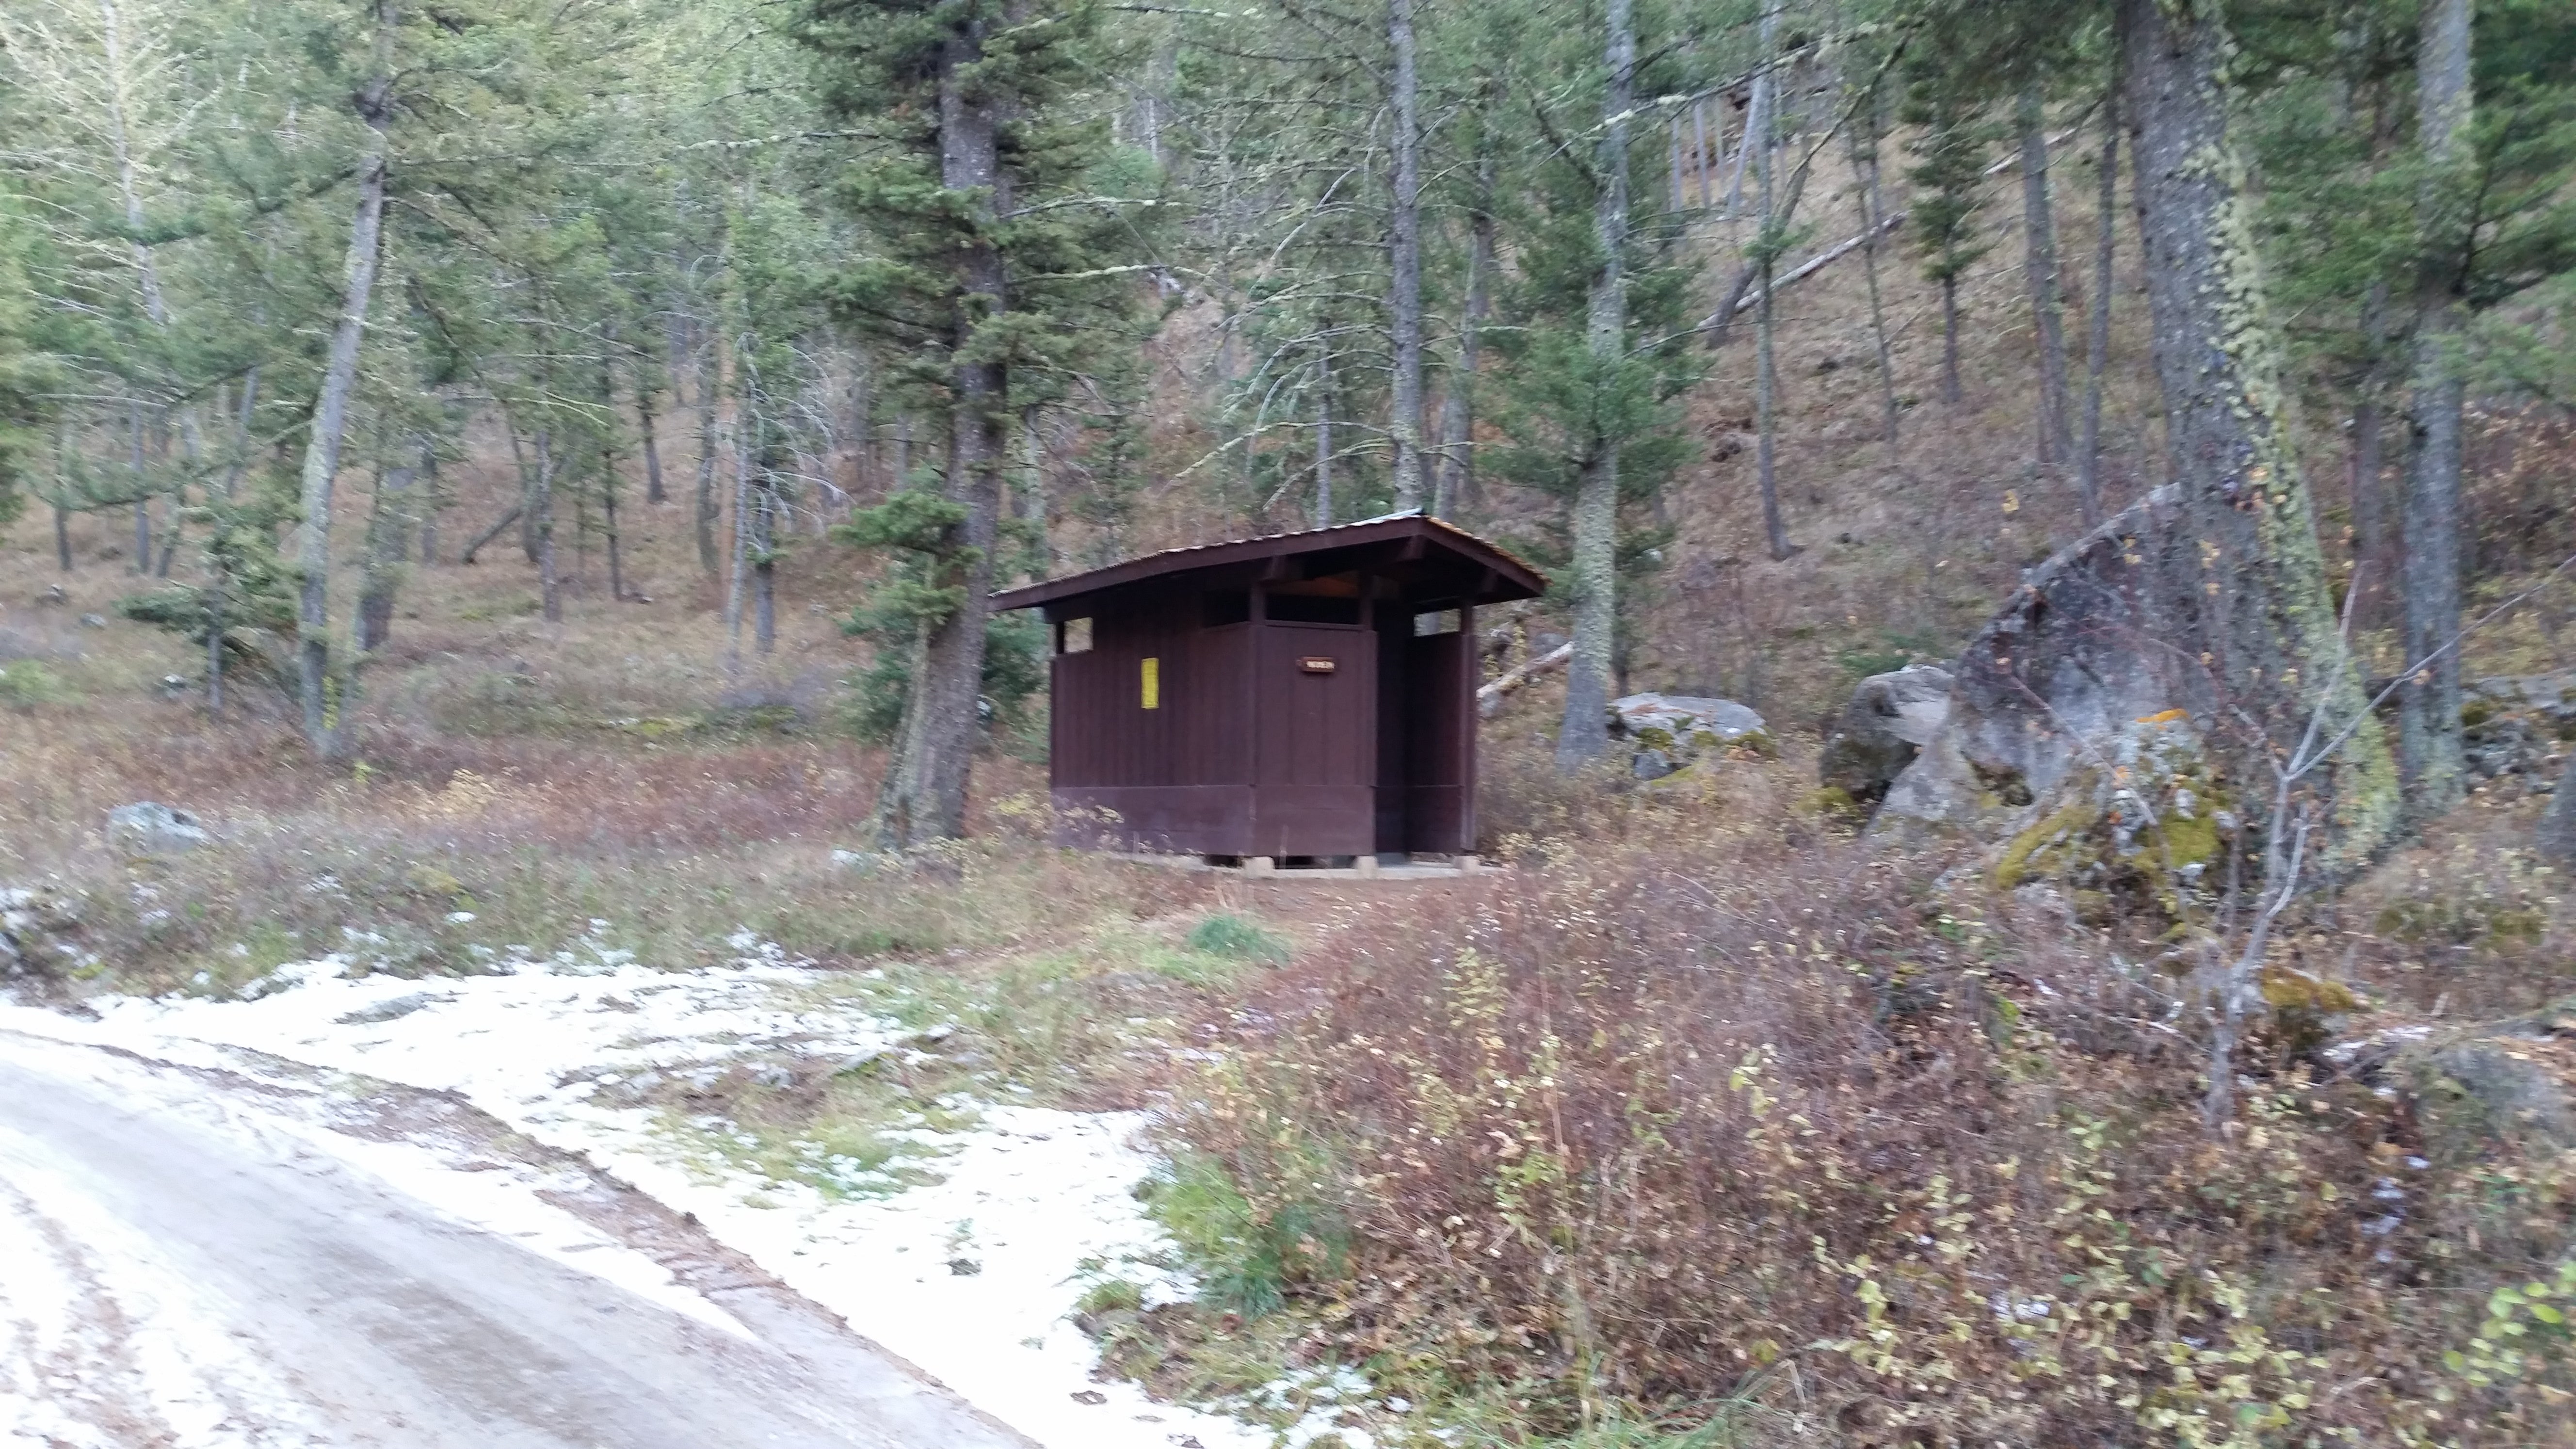 2nd outhouse